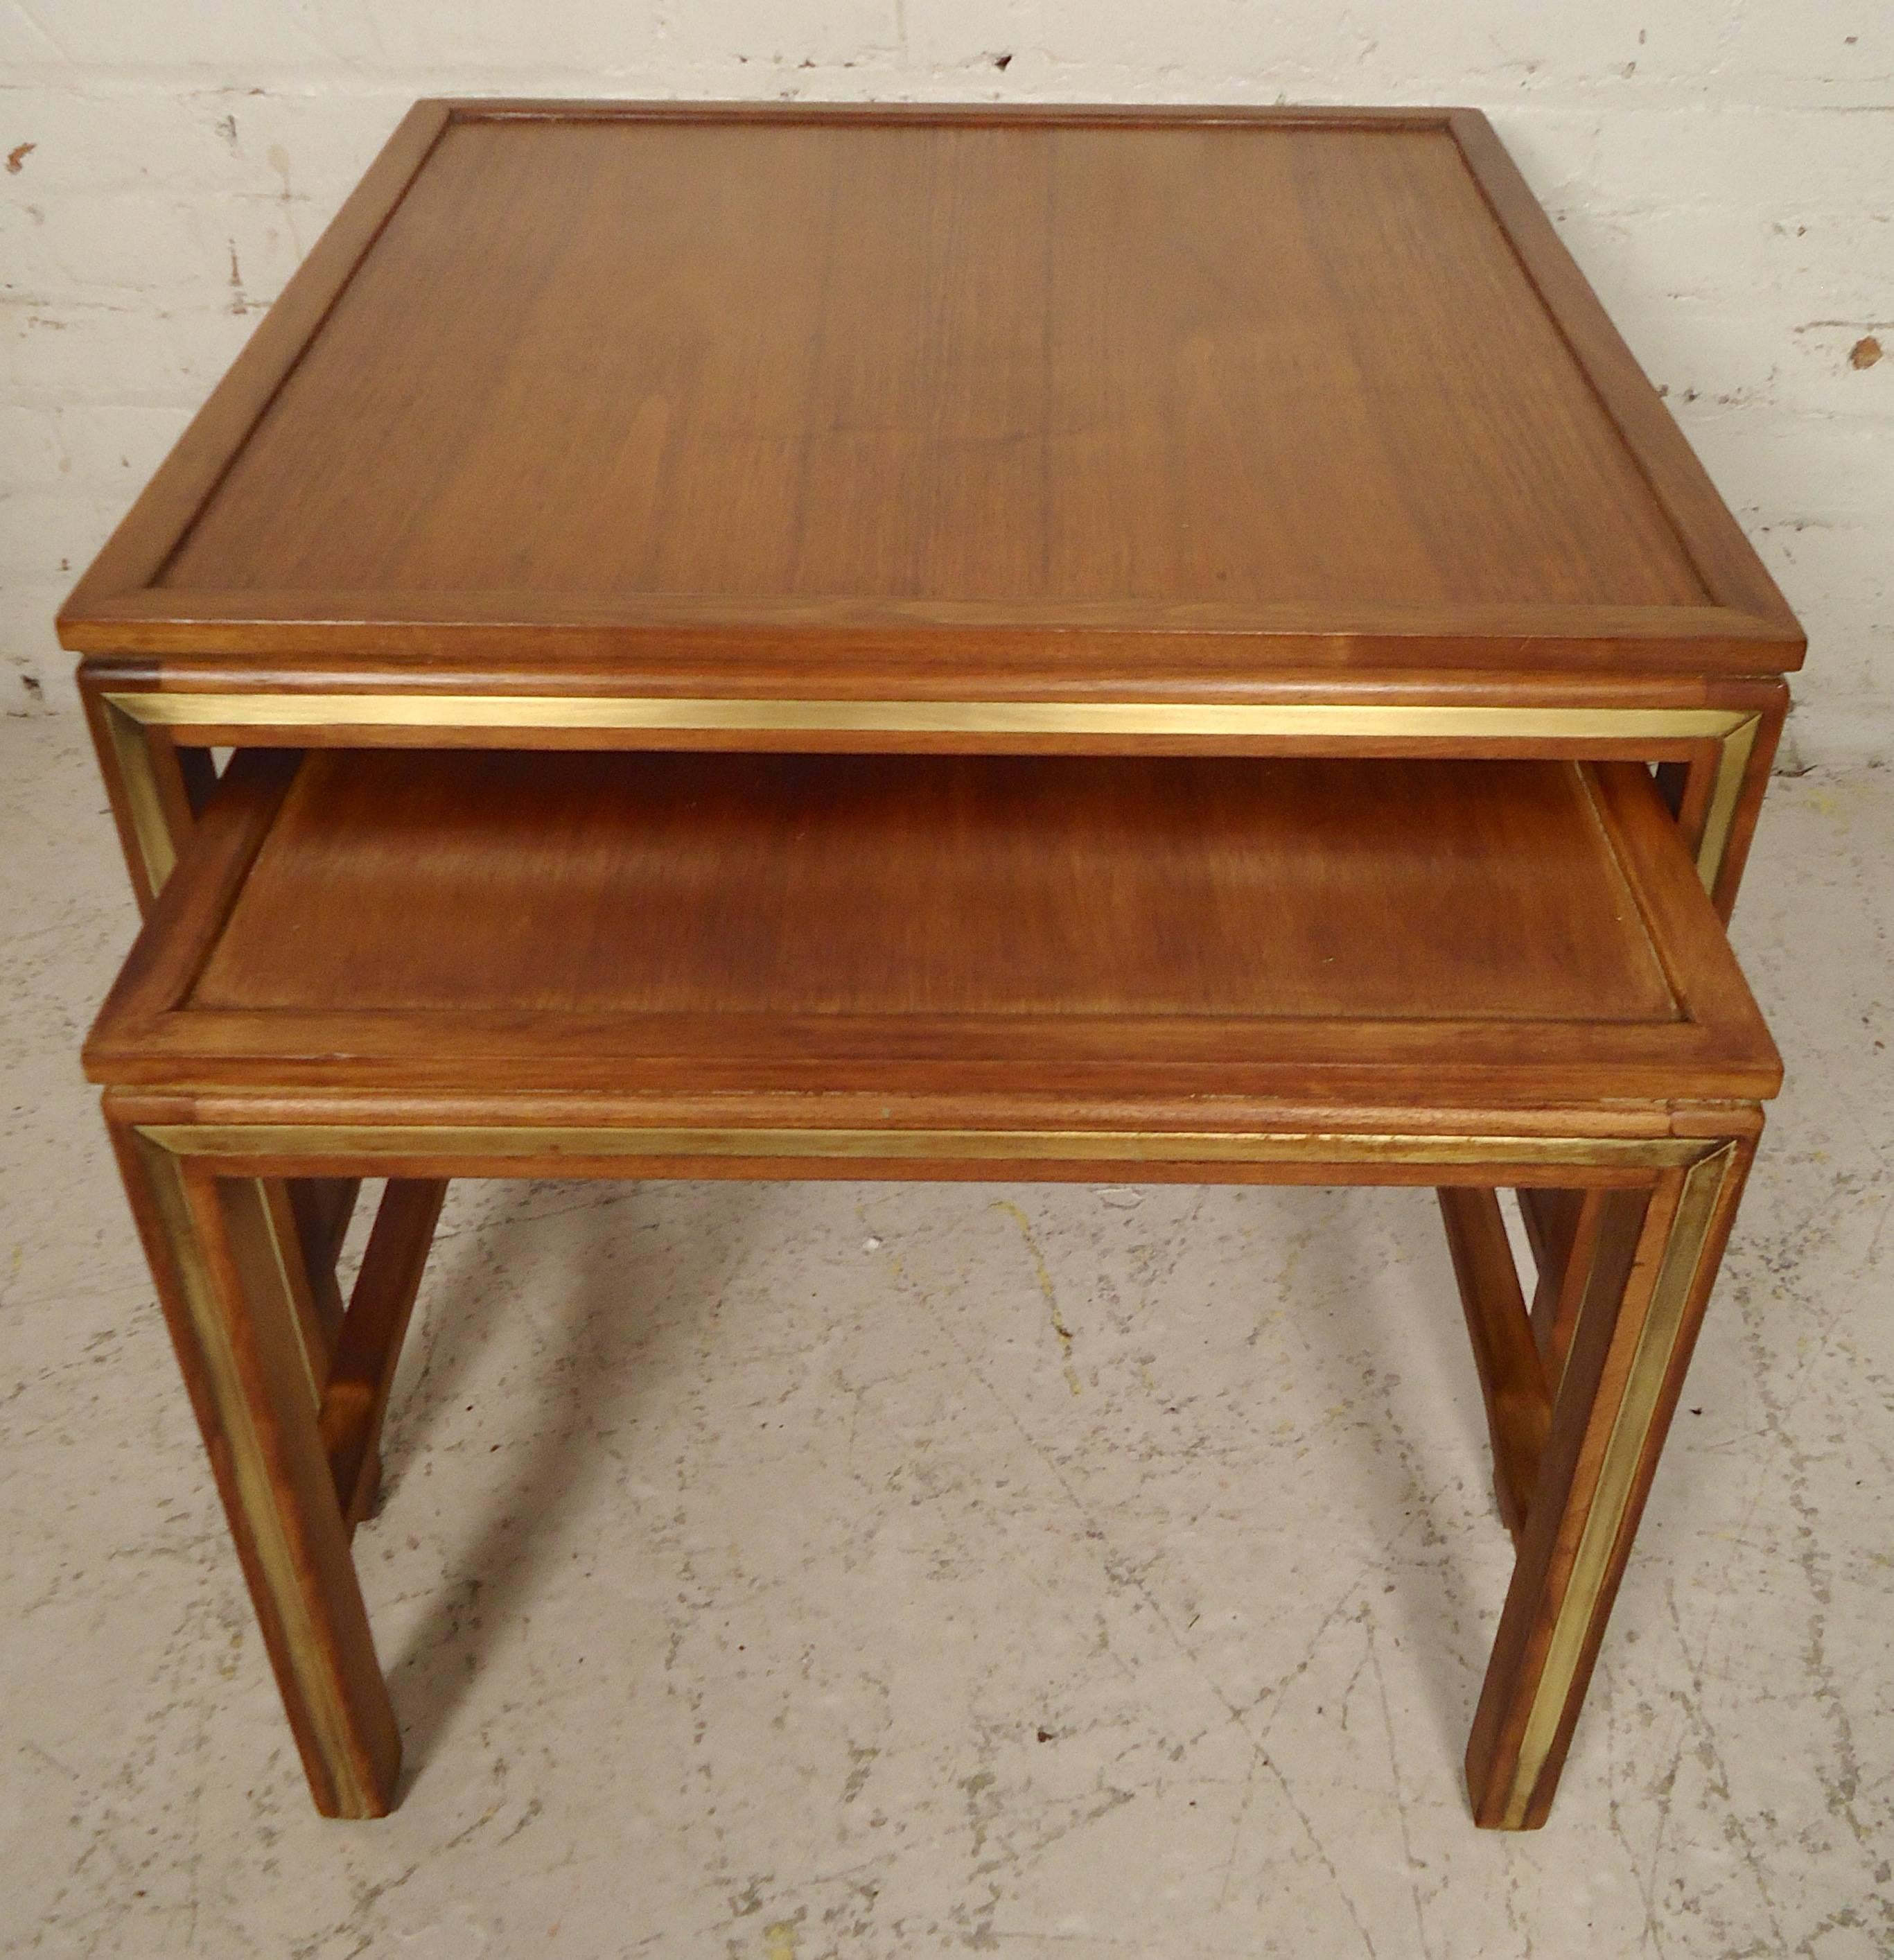 Gorgeous Mid-Century side tables by Widdicomb. Warm walnut grain and inlay brass trim.

(Please confirm item location - NY or NJ - with dealer).
 